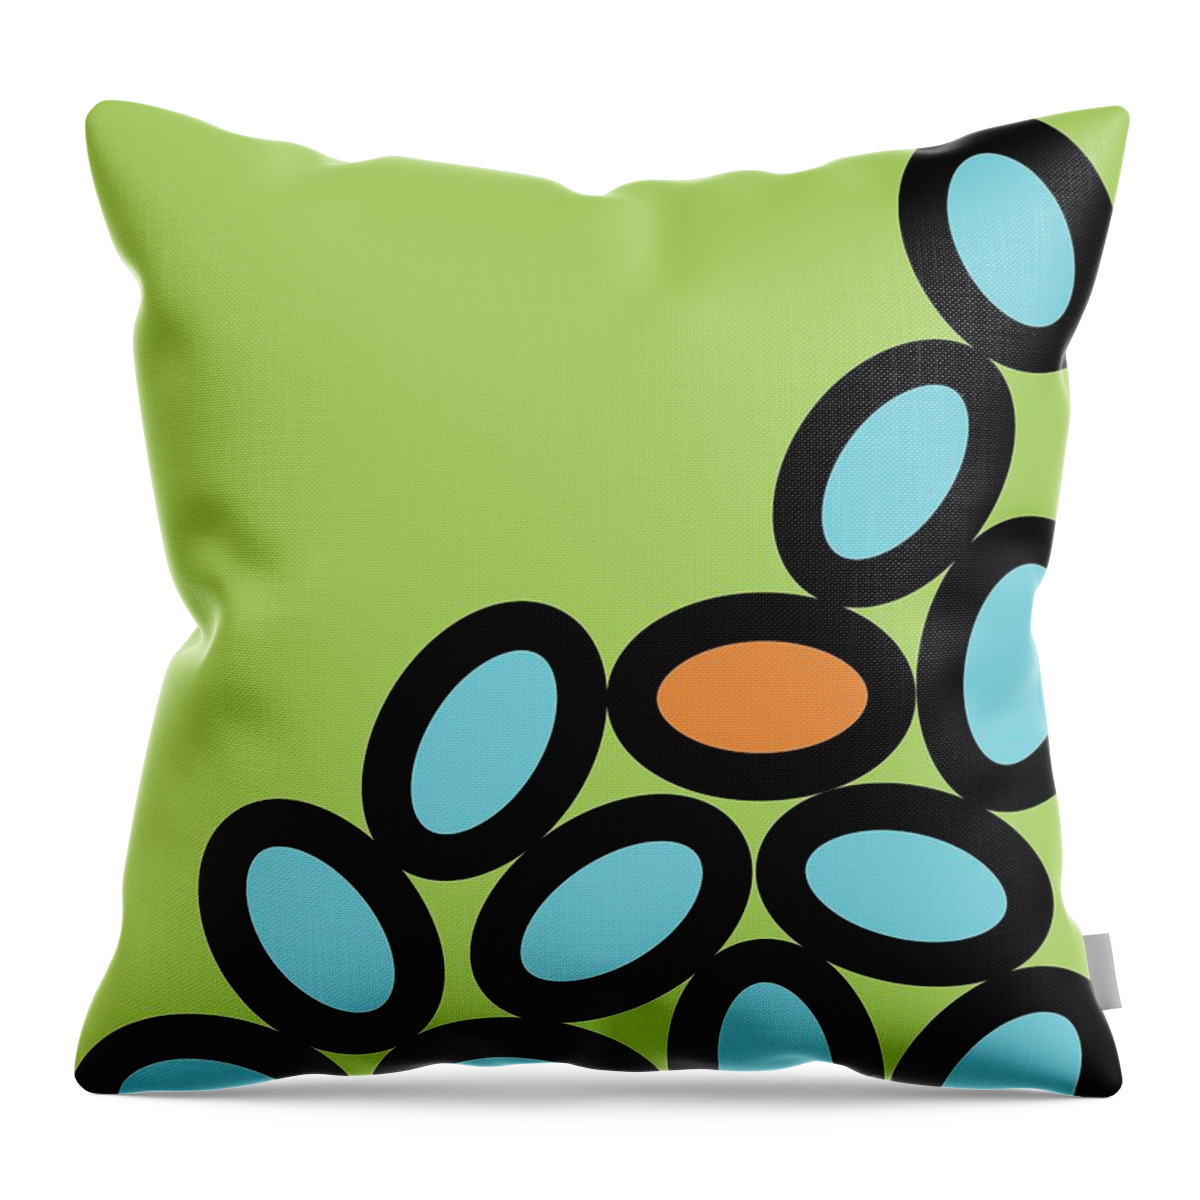 Abstract Throw Pillow featuring the digital art Abstract Ovals on Green by Donna Mibus